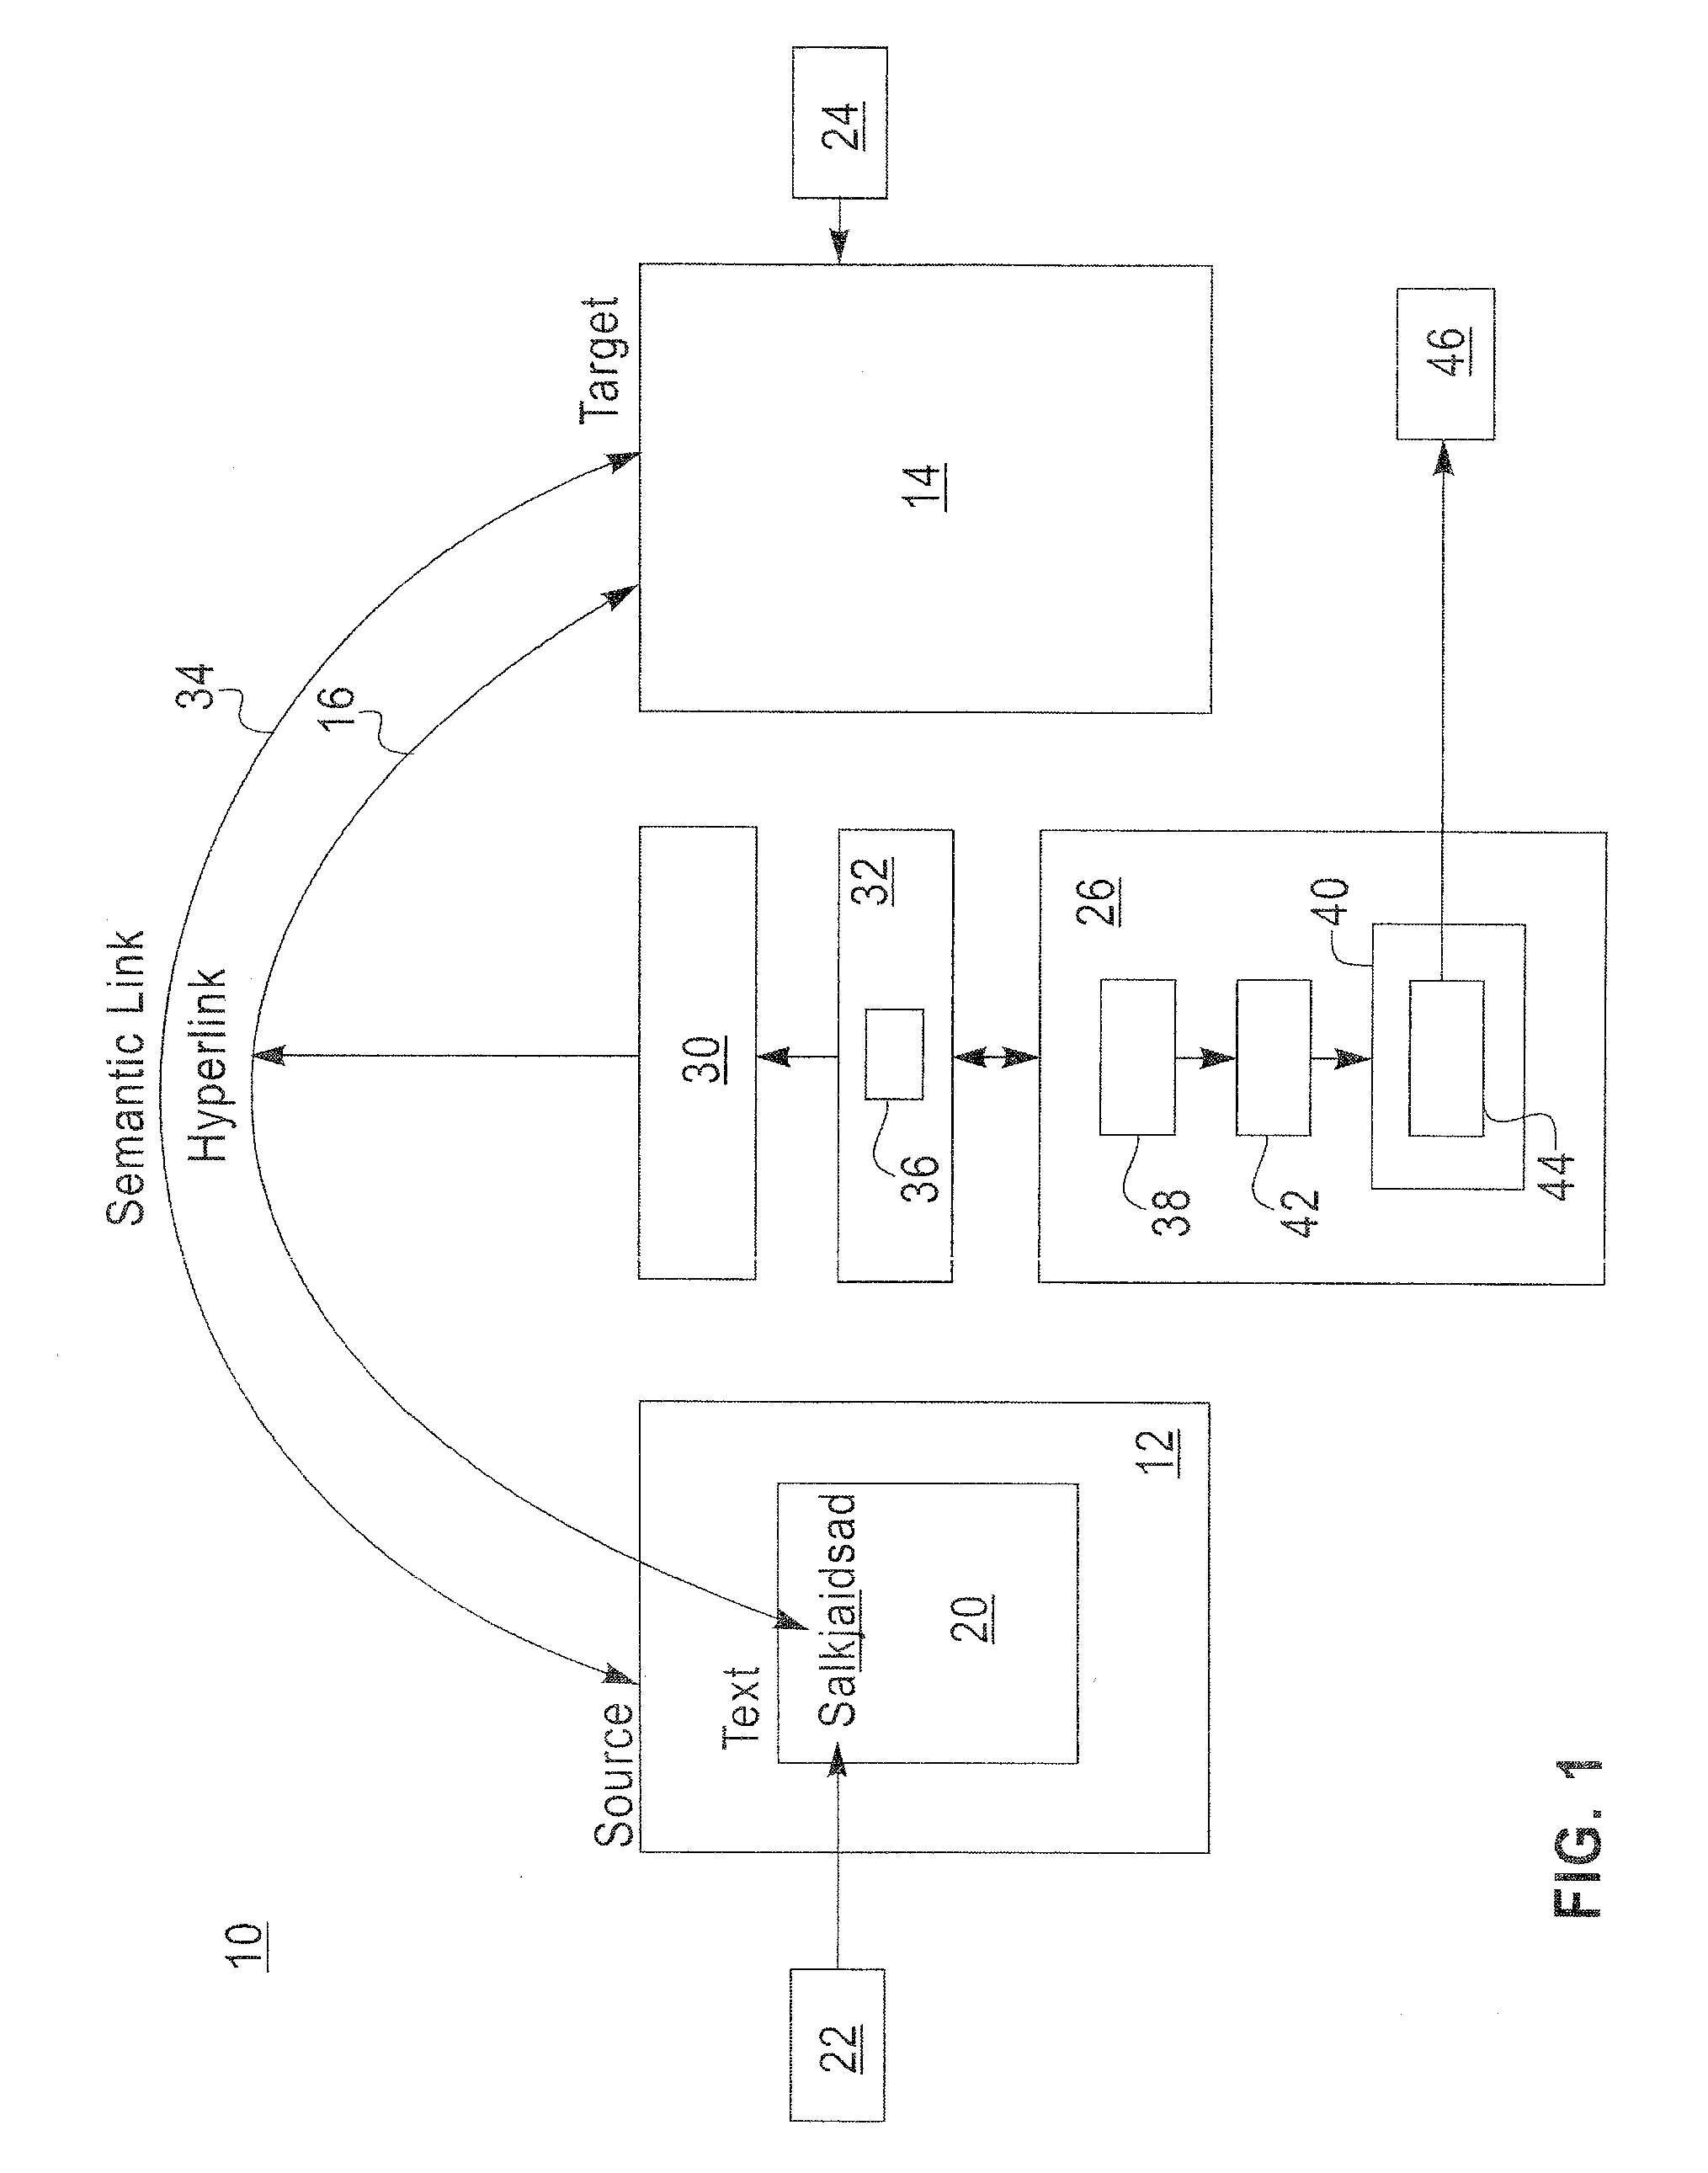 Method and system for creating semantic relationships using hyperlinks